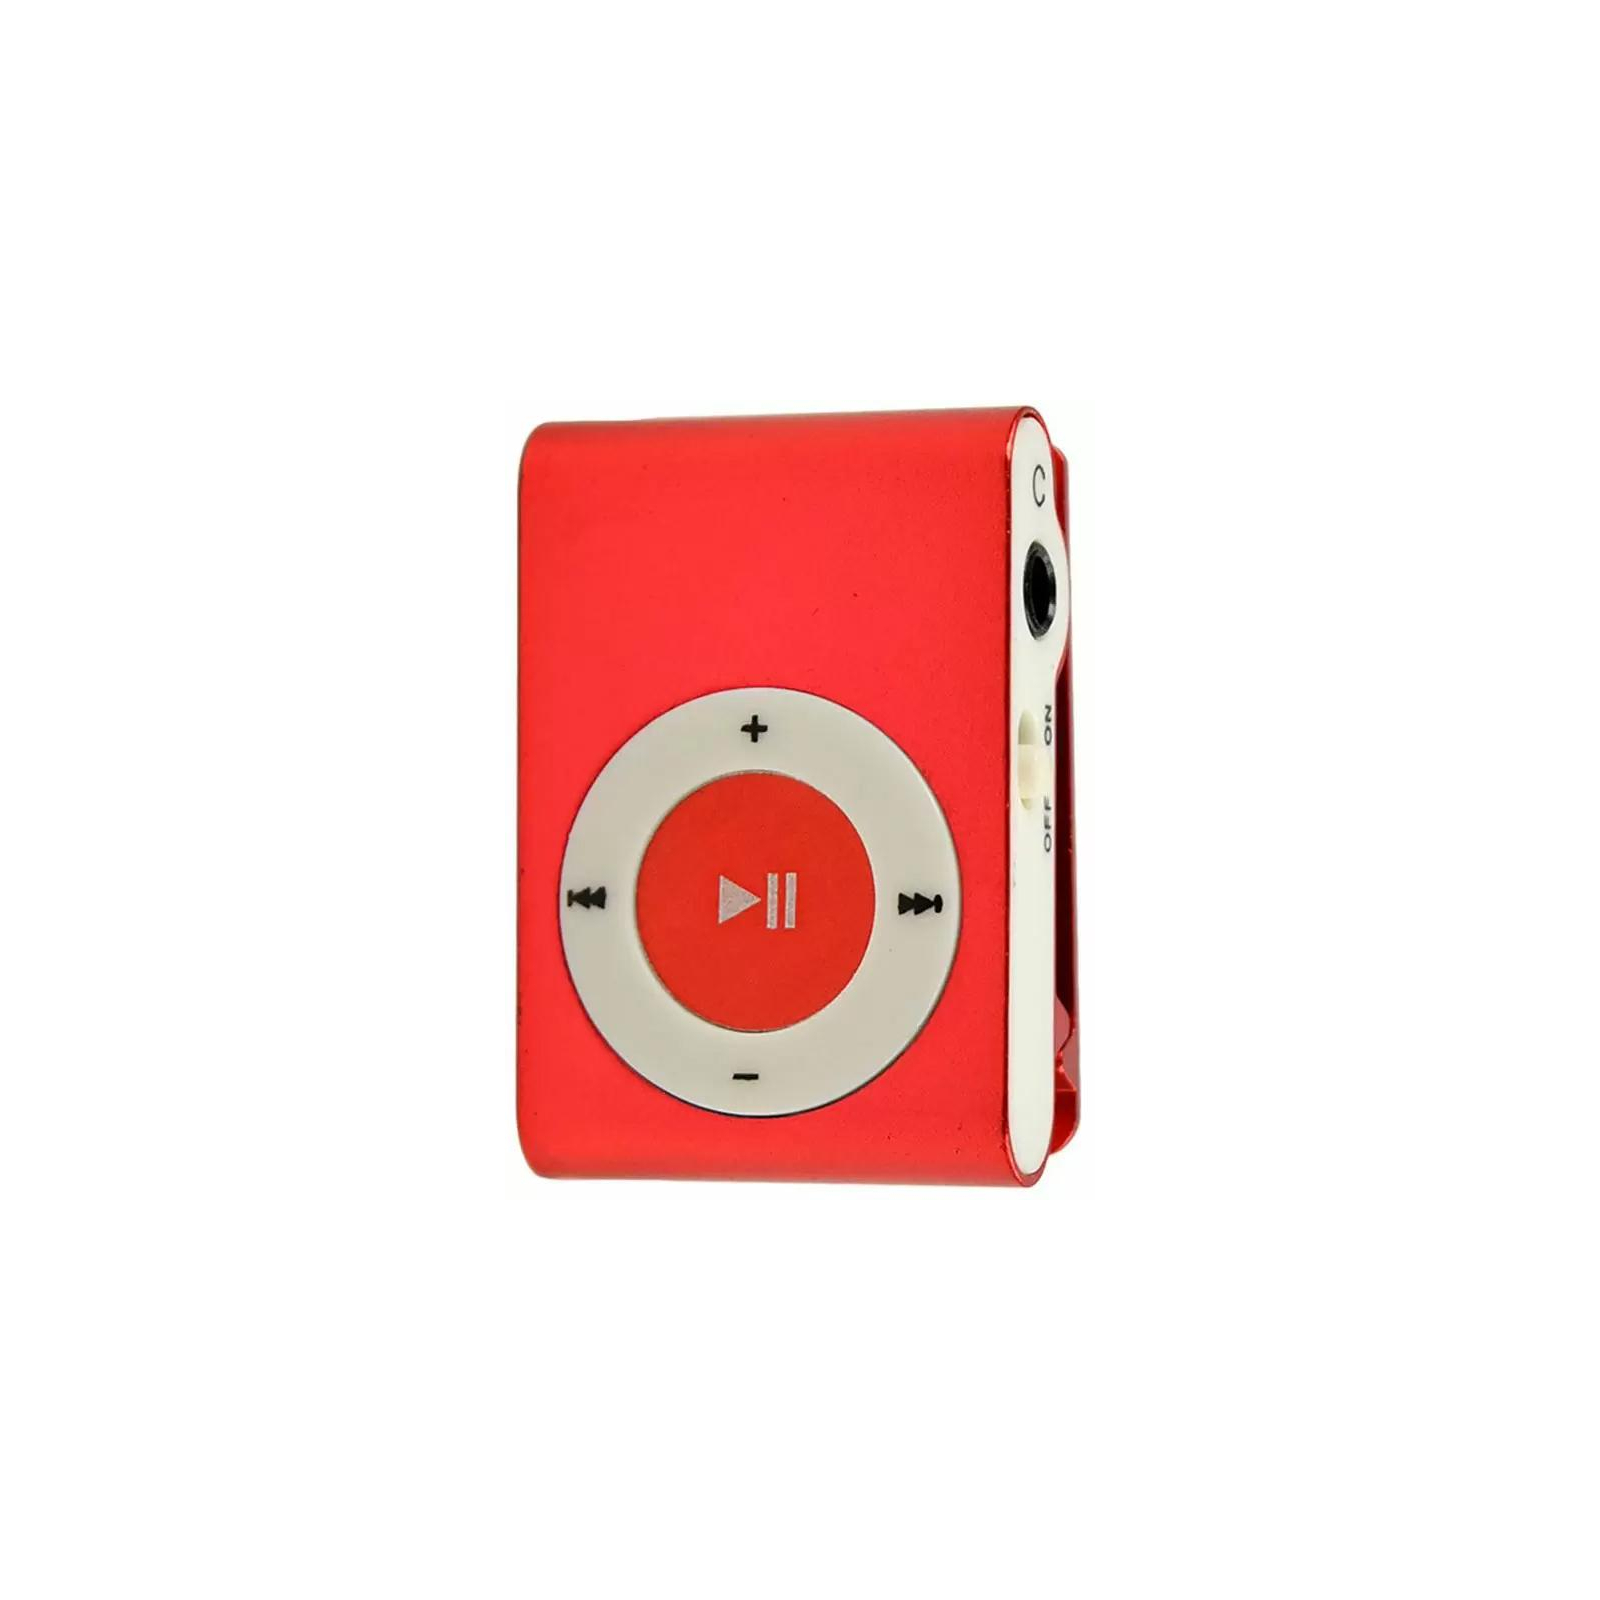 MP3 плеєр Toto Without display&Earphone Mp3 Red (TPS-03-Red)